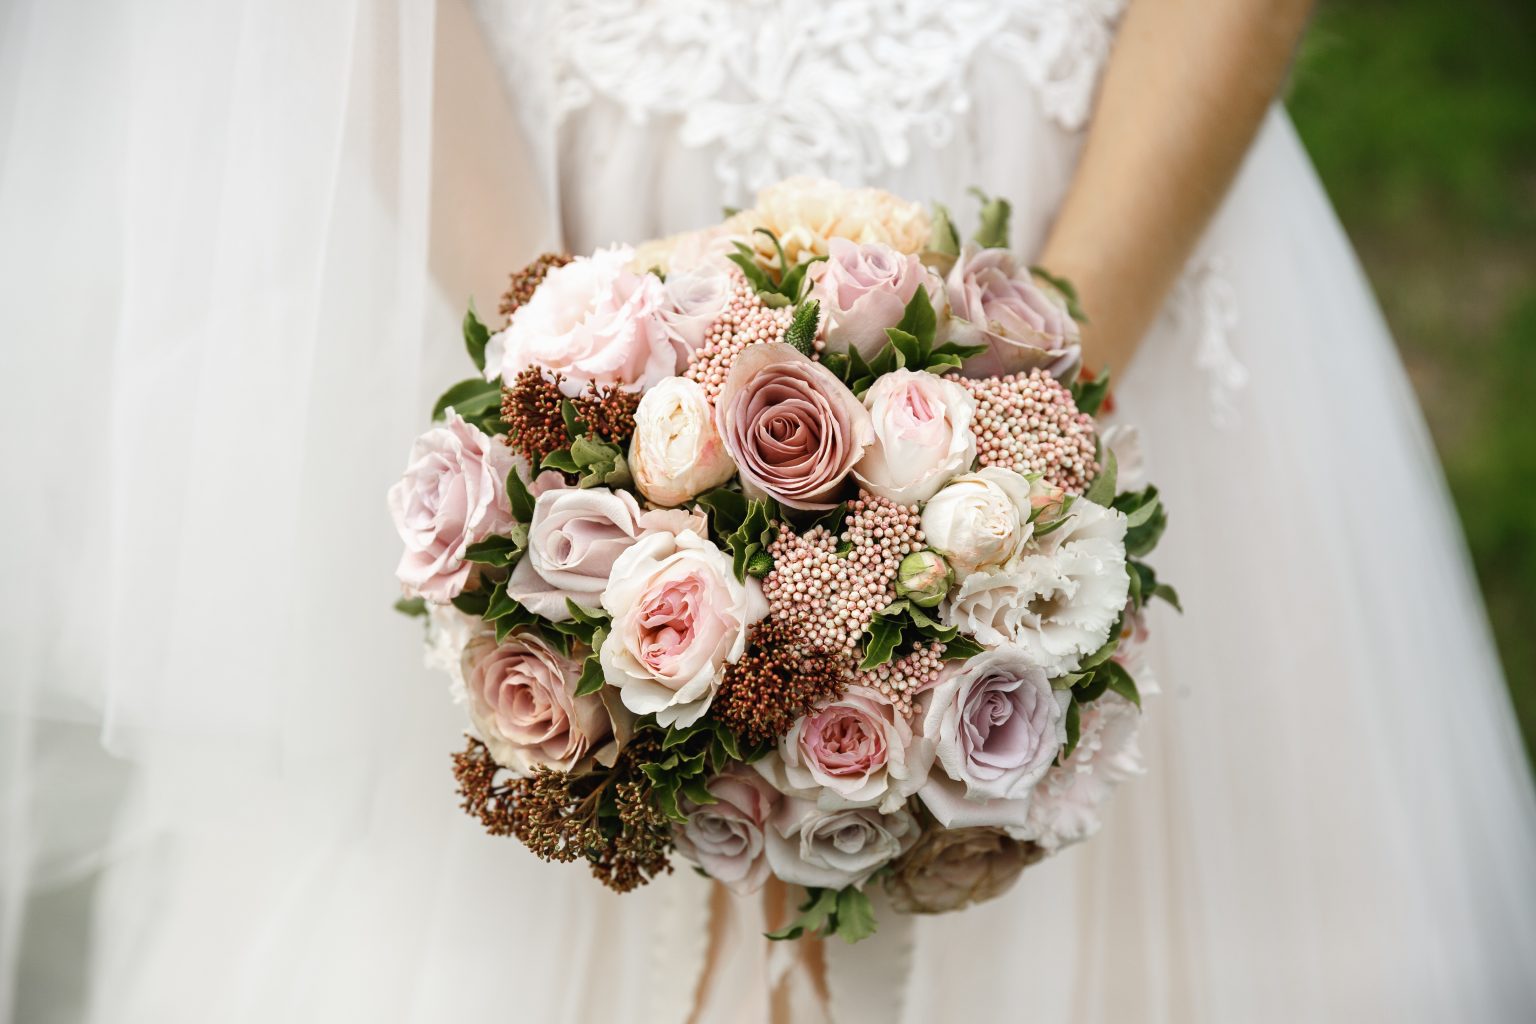 Traditional Wedding Flowers and Their Hidden Meanings - Wedding